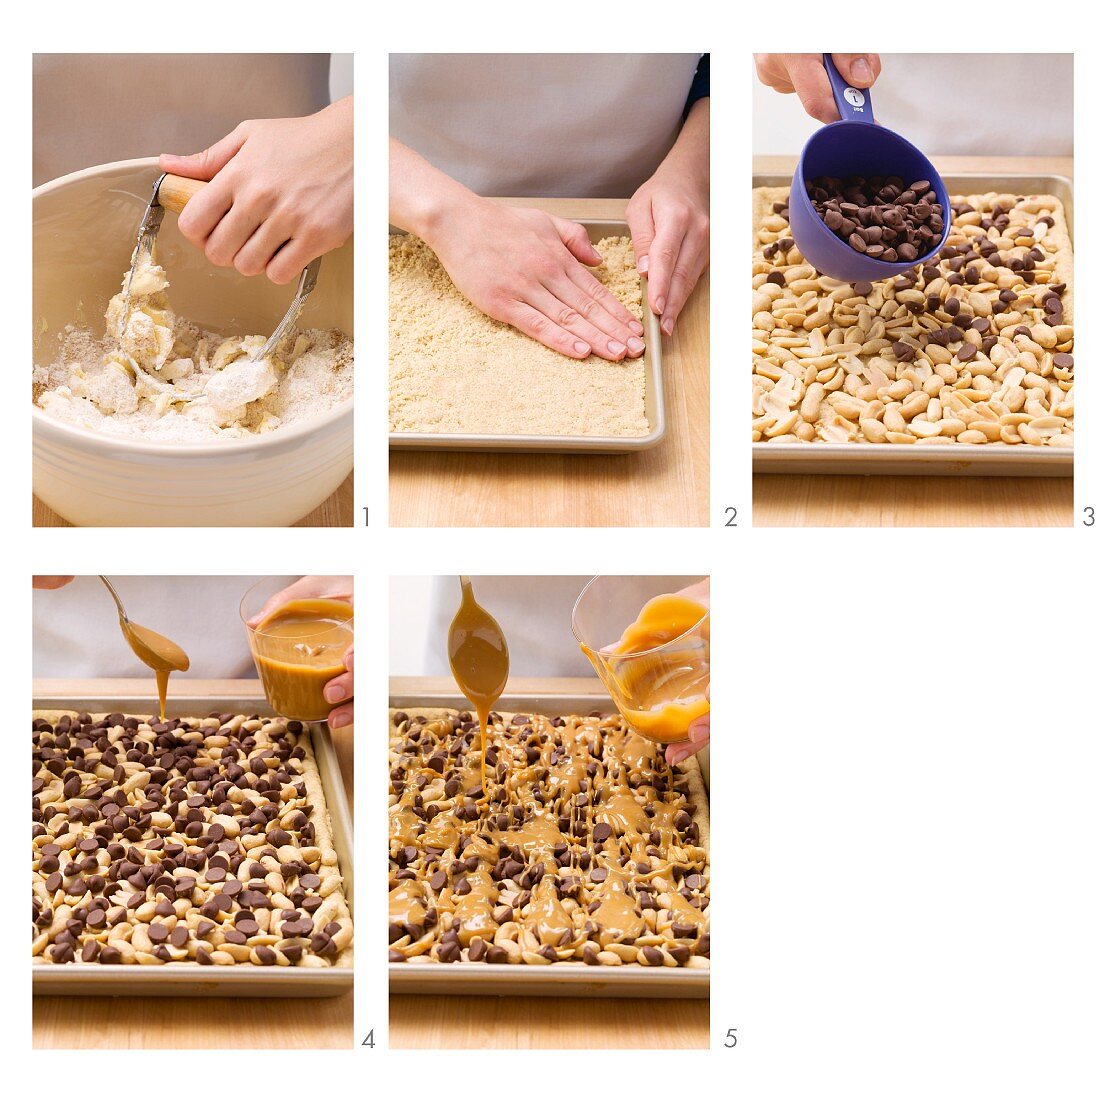 Preparing peanut and toffee bars with chocolate chips